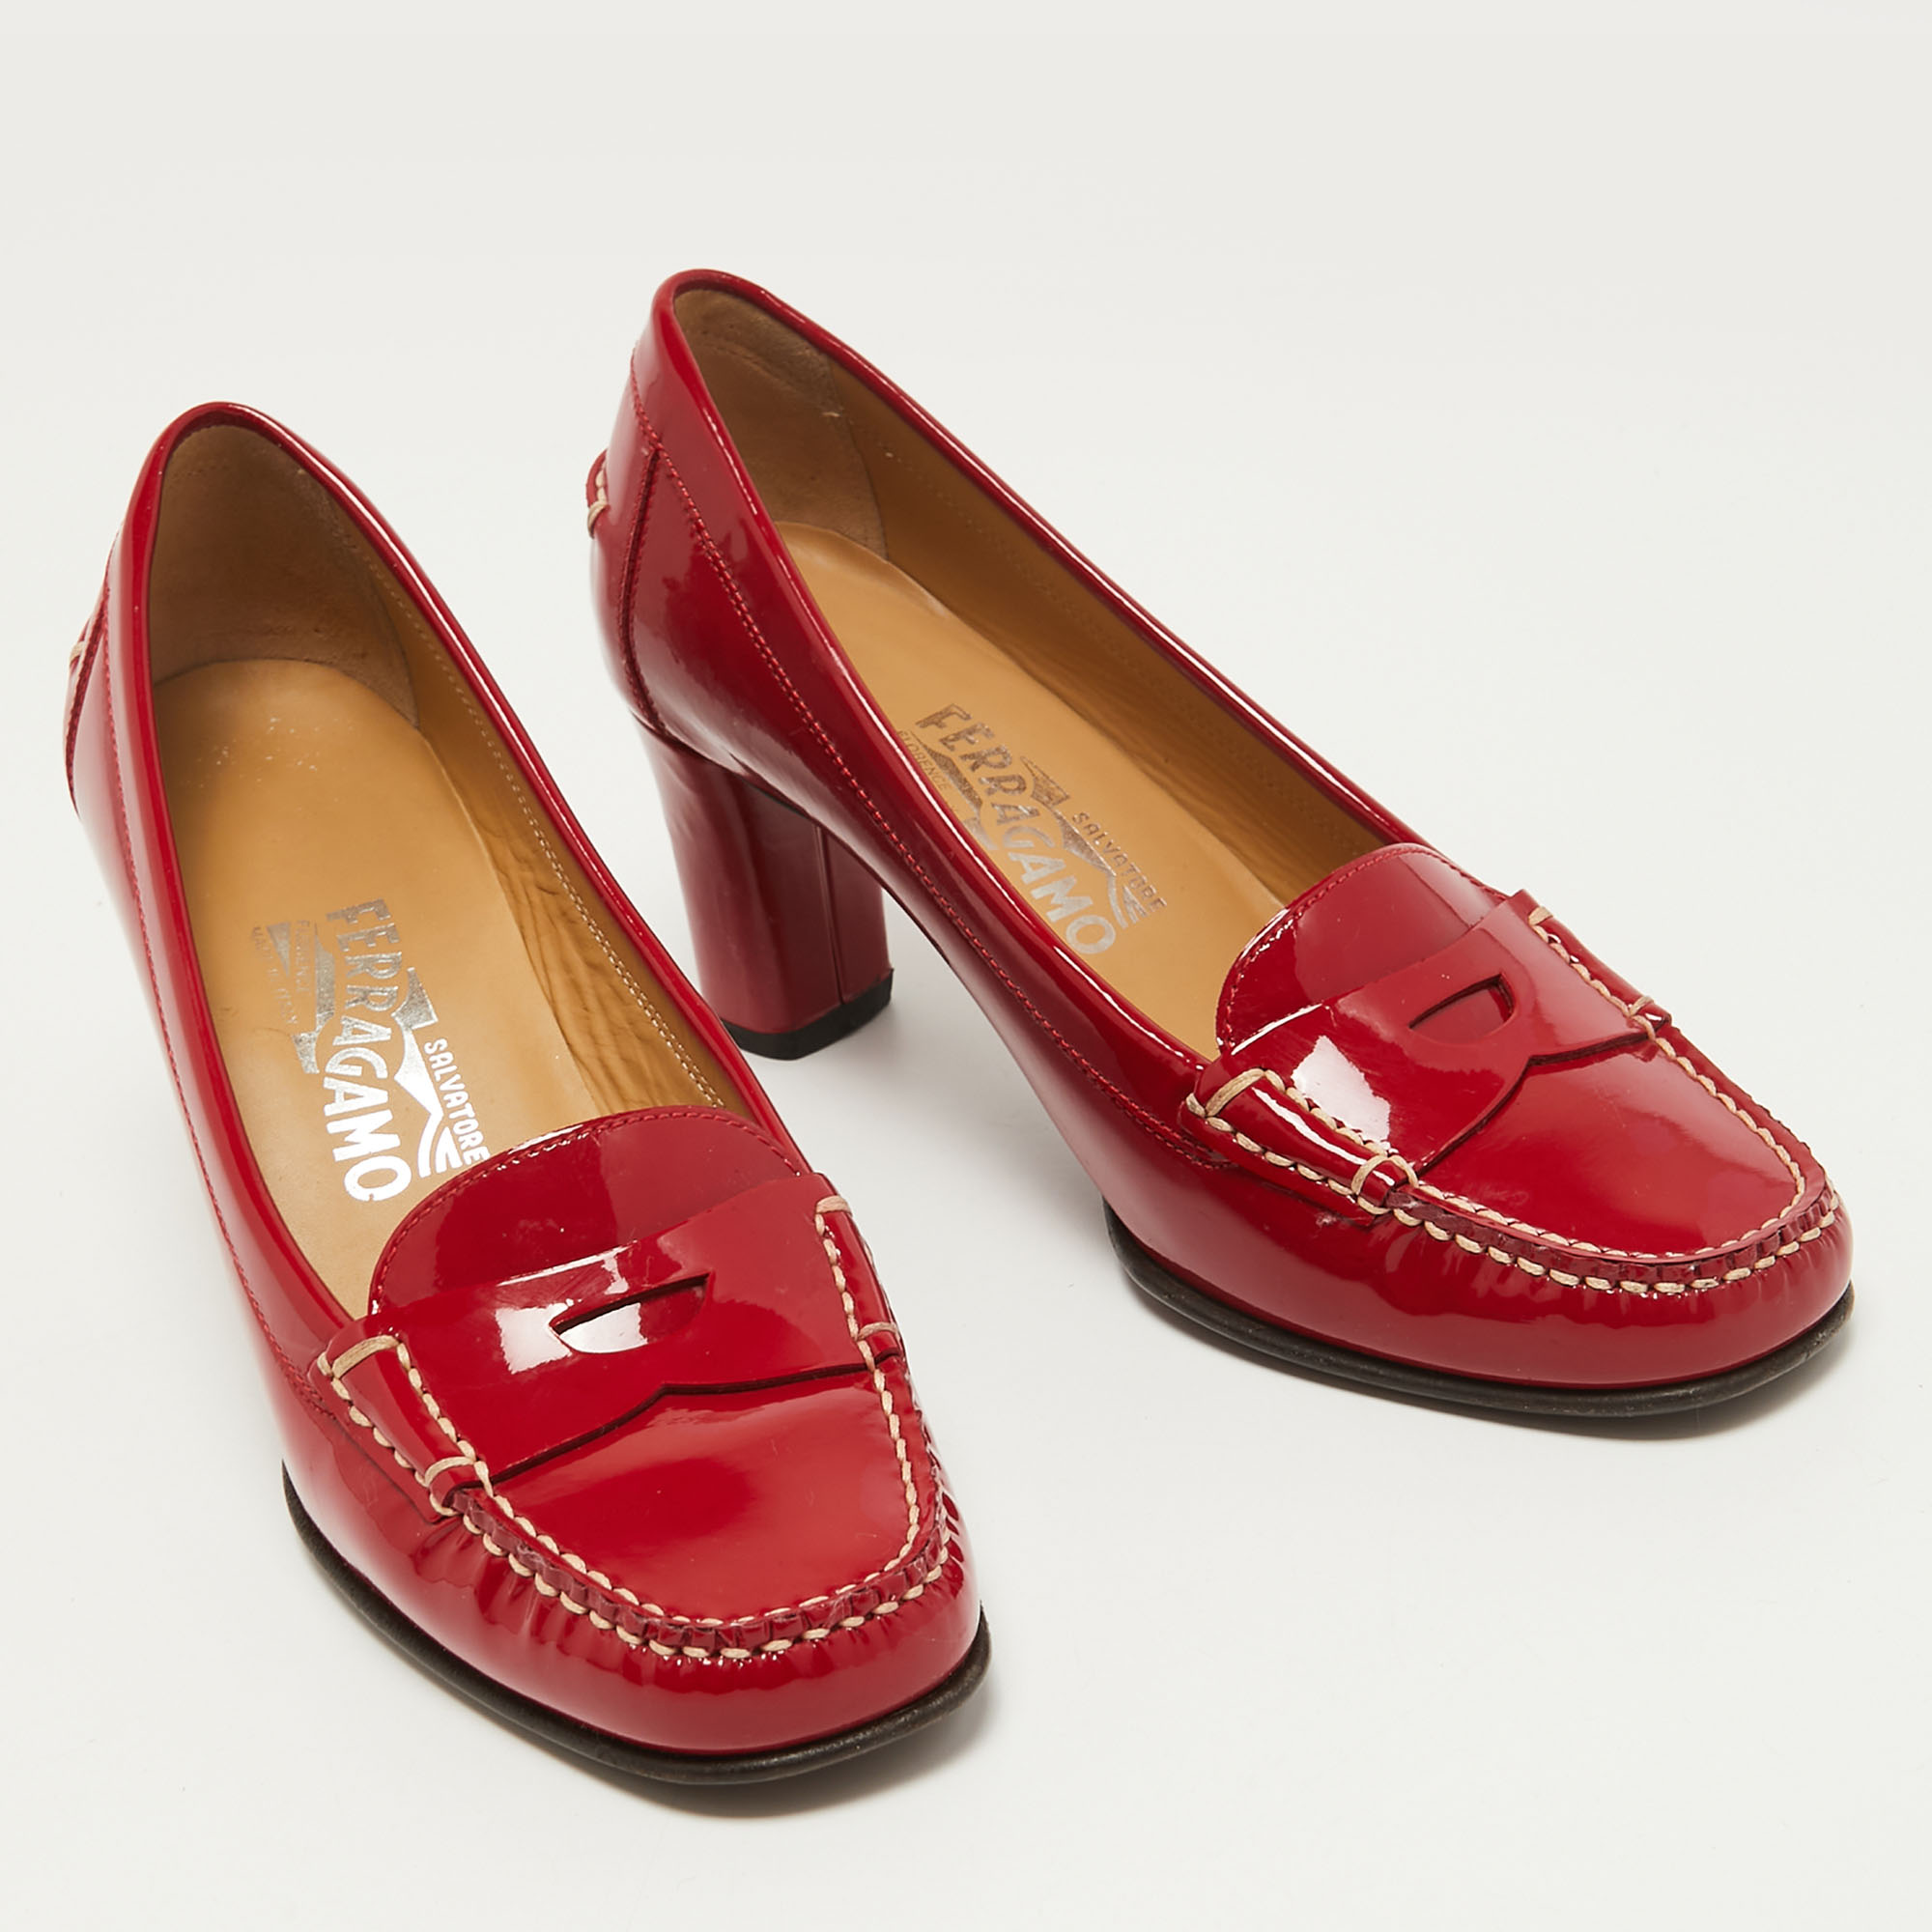 Salvatore Ferragamo Red Patent Leather Penny Slip On Loafers Size 37.5